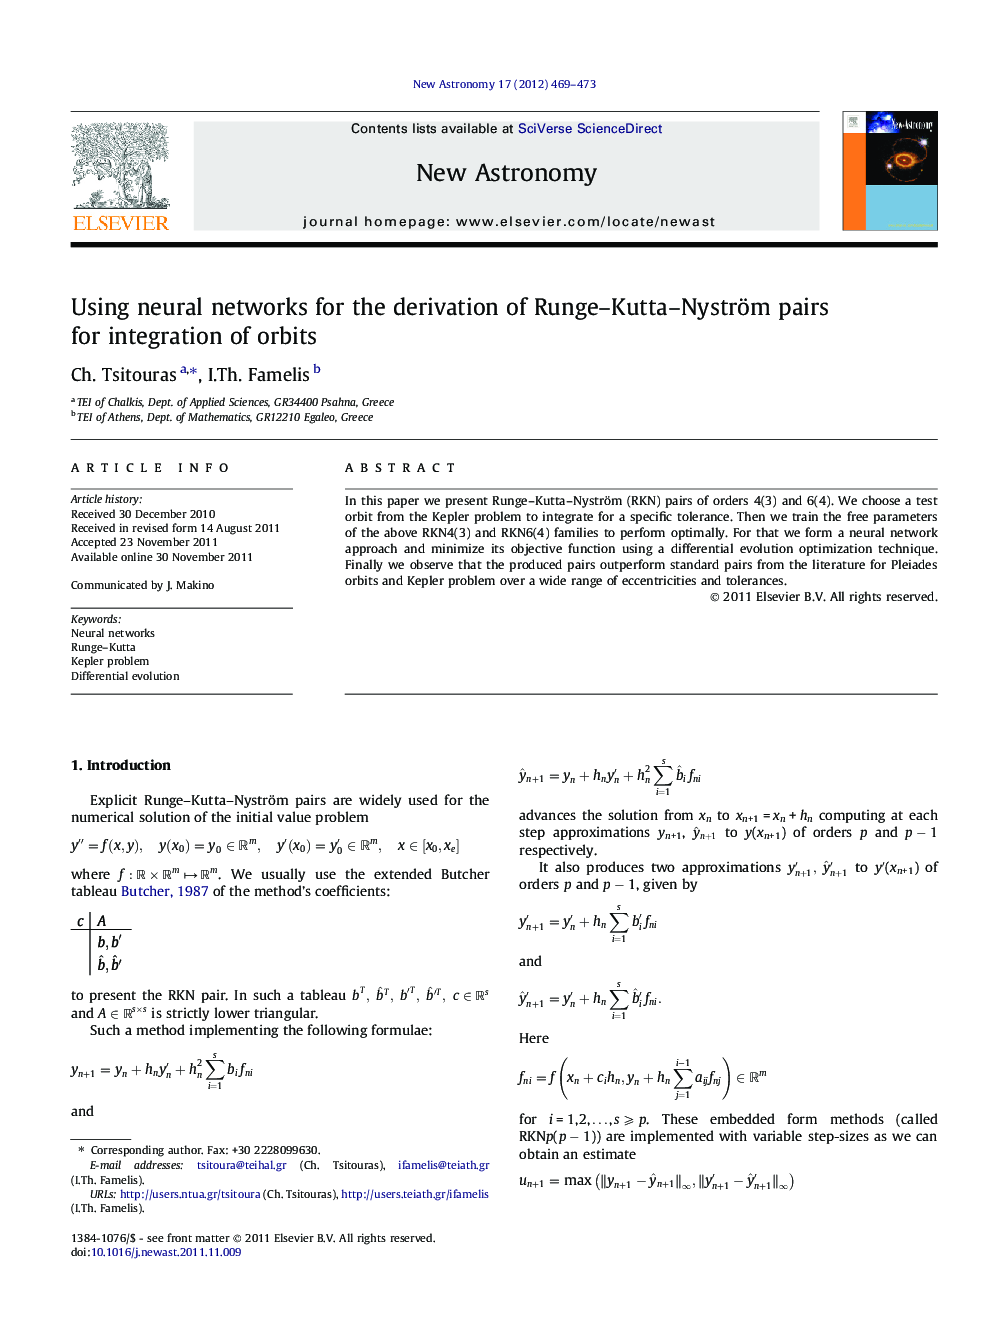 Using neural networks for the derivation of Runge–Kutta–Nyström pairs for integration of orbits